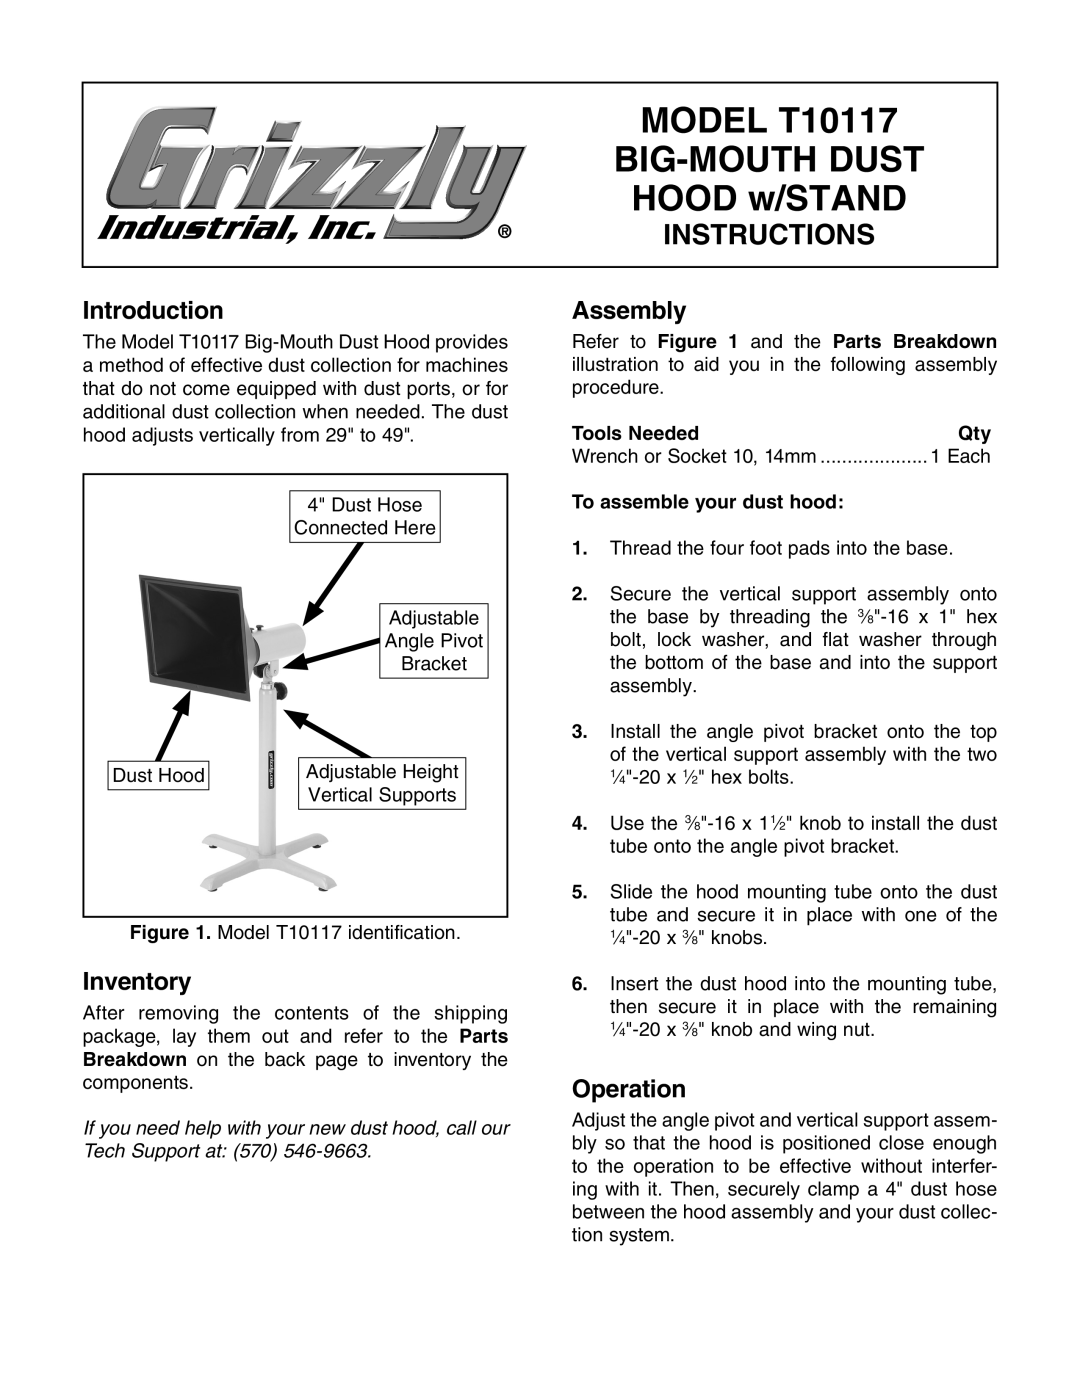 Grizzly manual MODEL T10117, Big-Mouth Dust, HOOD w/STAND, Instructions, Introduction, Assembly, Inventory, Operation 